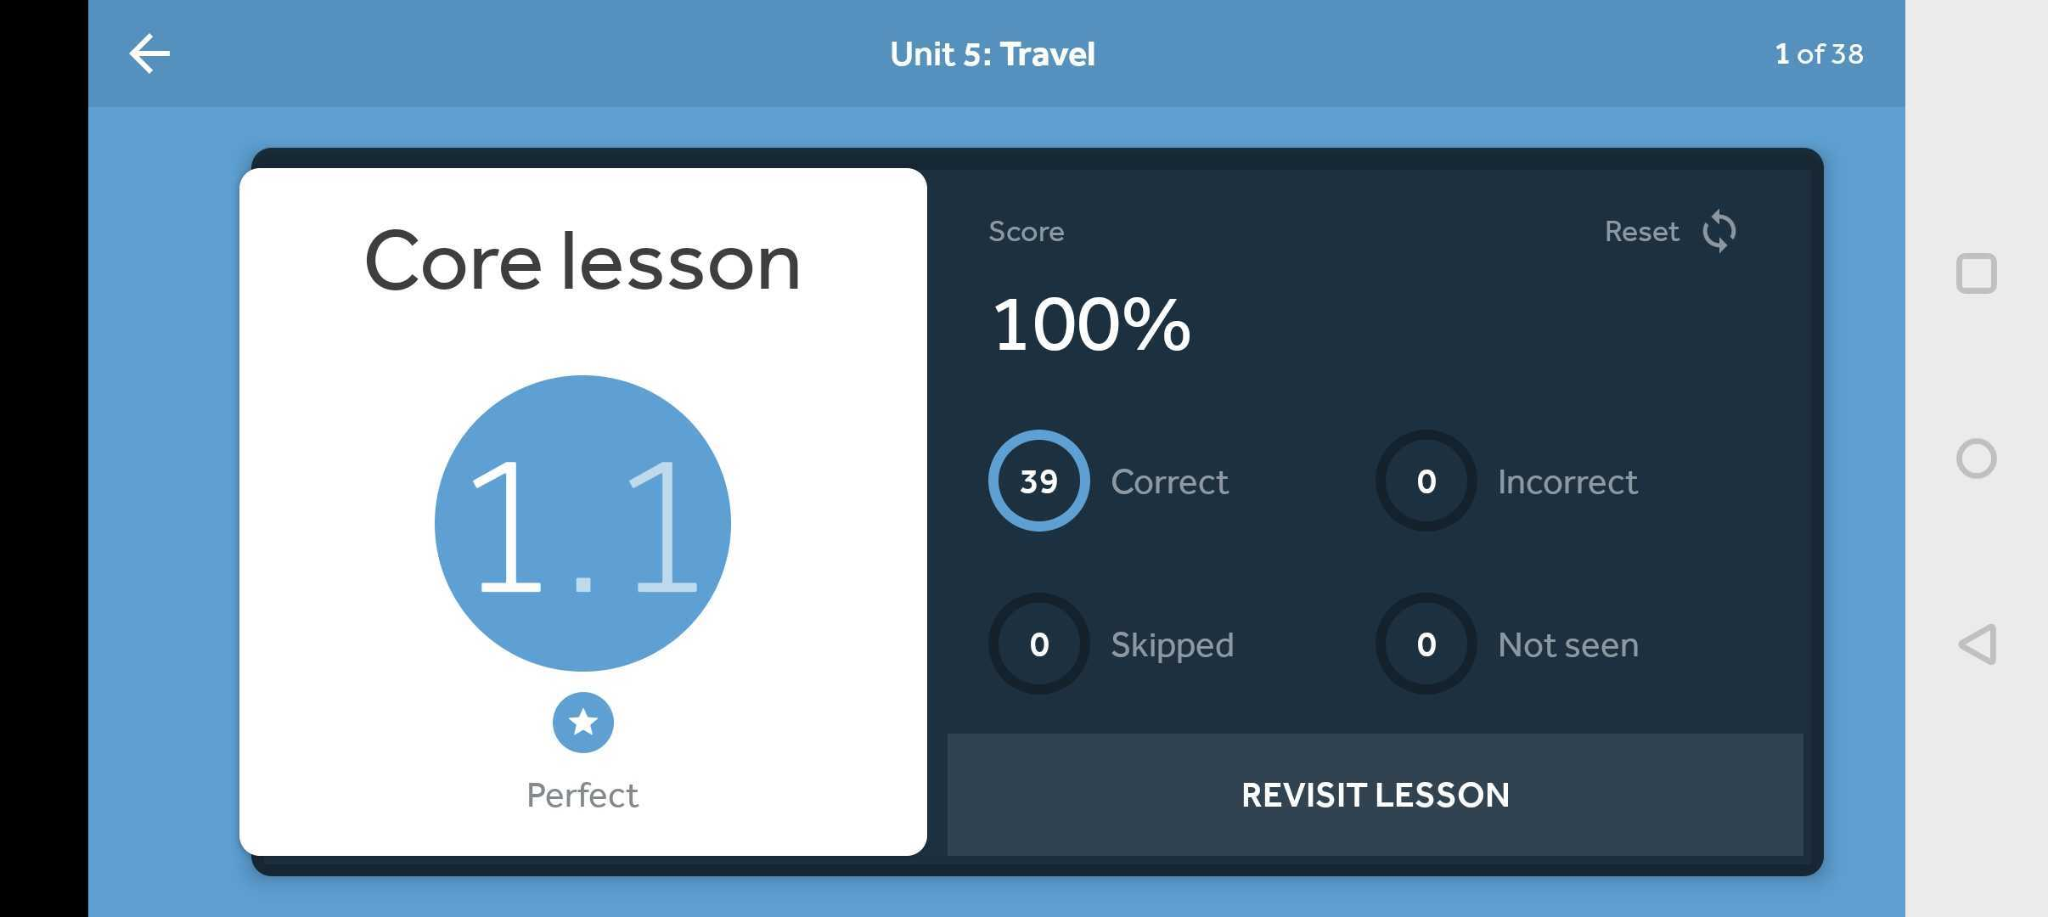 Each time you complete a lesson on Rosetta Stone you'll see insights into your language progress